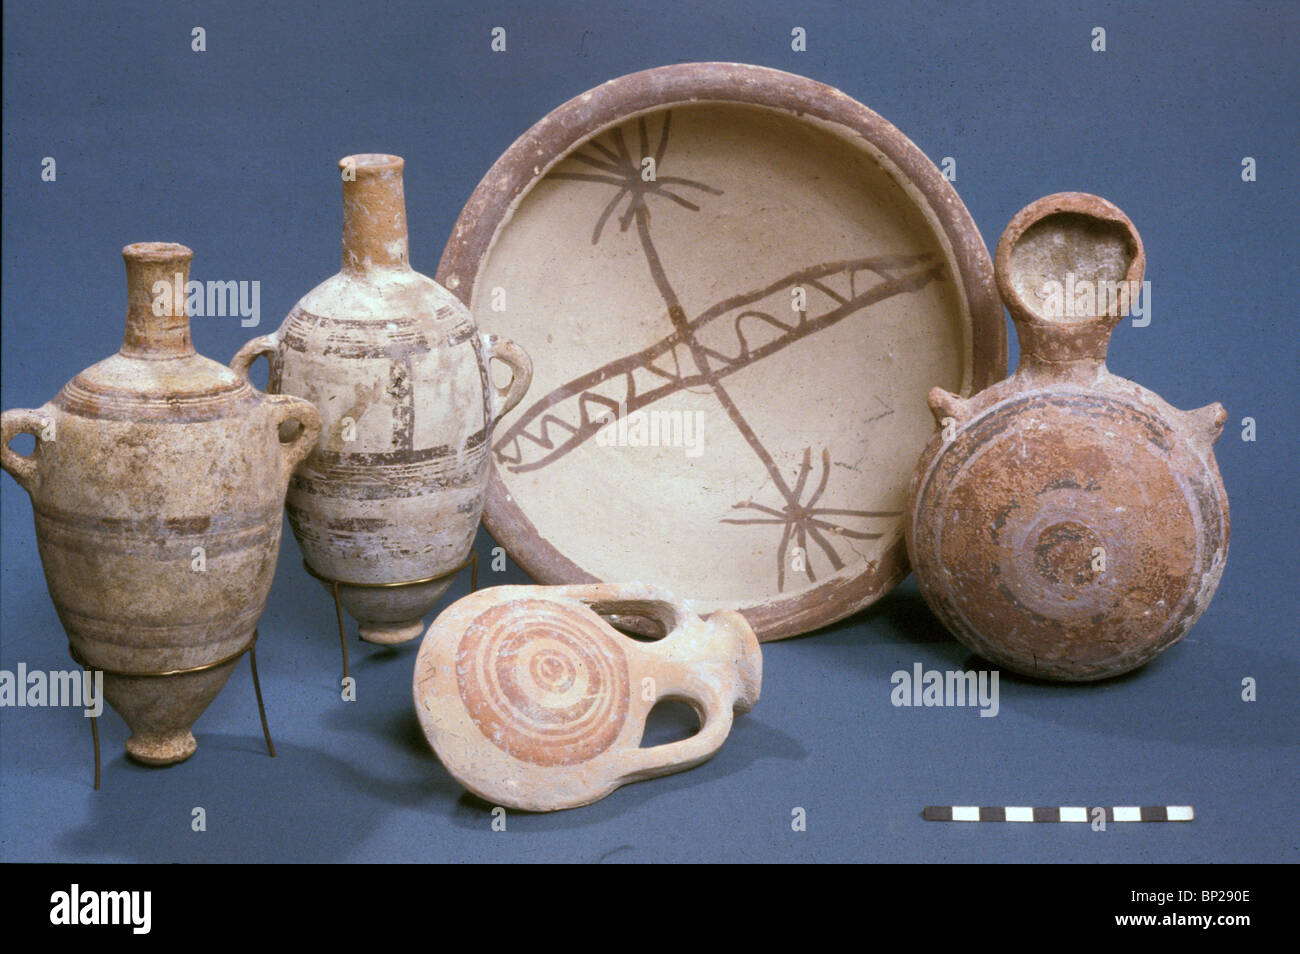 2456. DECORATED CNAANITE POTTERY, LATE BRONZE PERIOD (1500-1200 B.C.) FROM GEZER Stock Photo